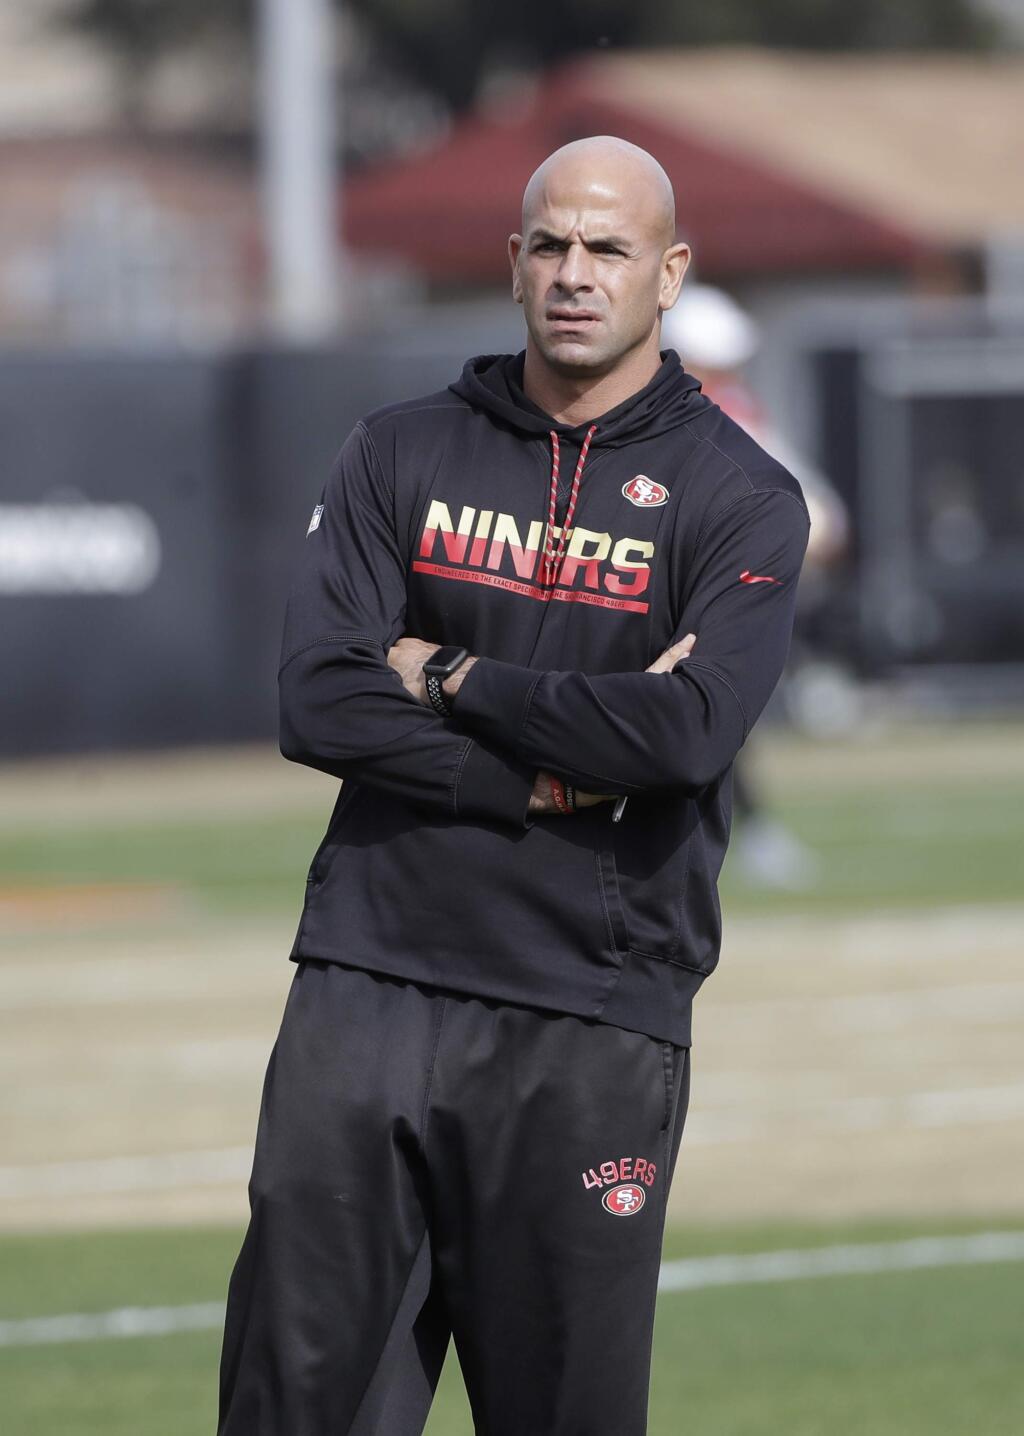 San Francisco 49ers defensive coordinator Robert Saleh watches as players practice at the team's training facility in Santa Clara, Thursday, Jan. 23, 2020. The 49ers will face the Kansas City Chiefs in Super Bowl LIV. (AP Photo/Jeff Chiu)